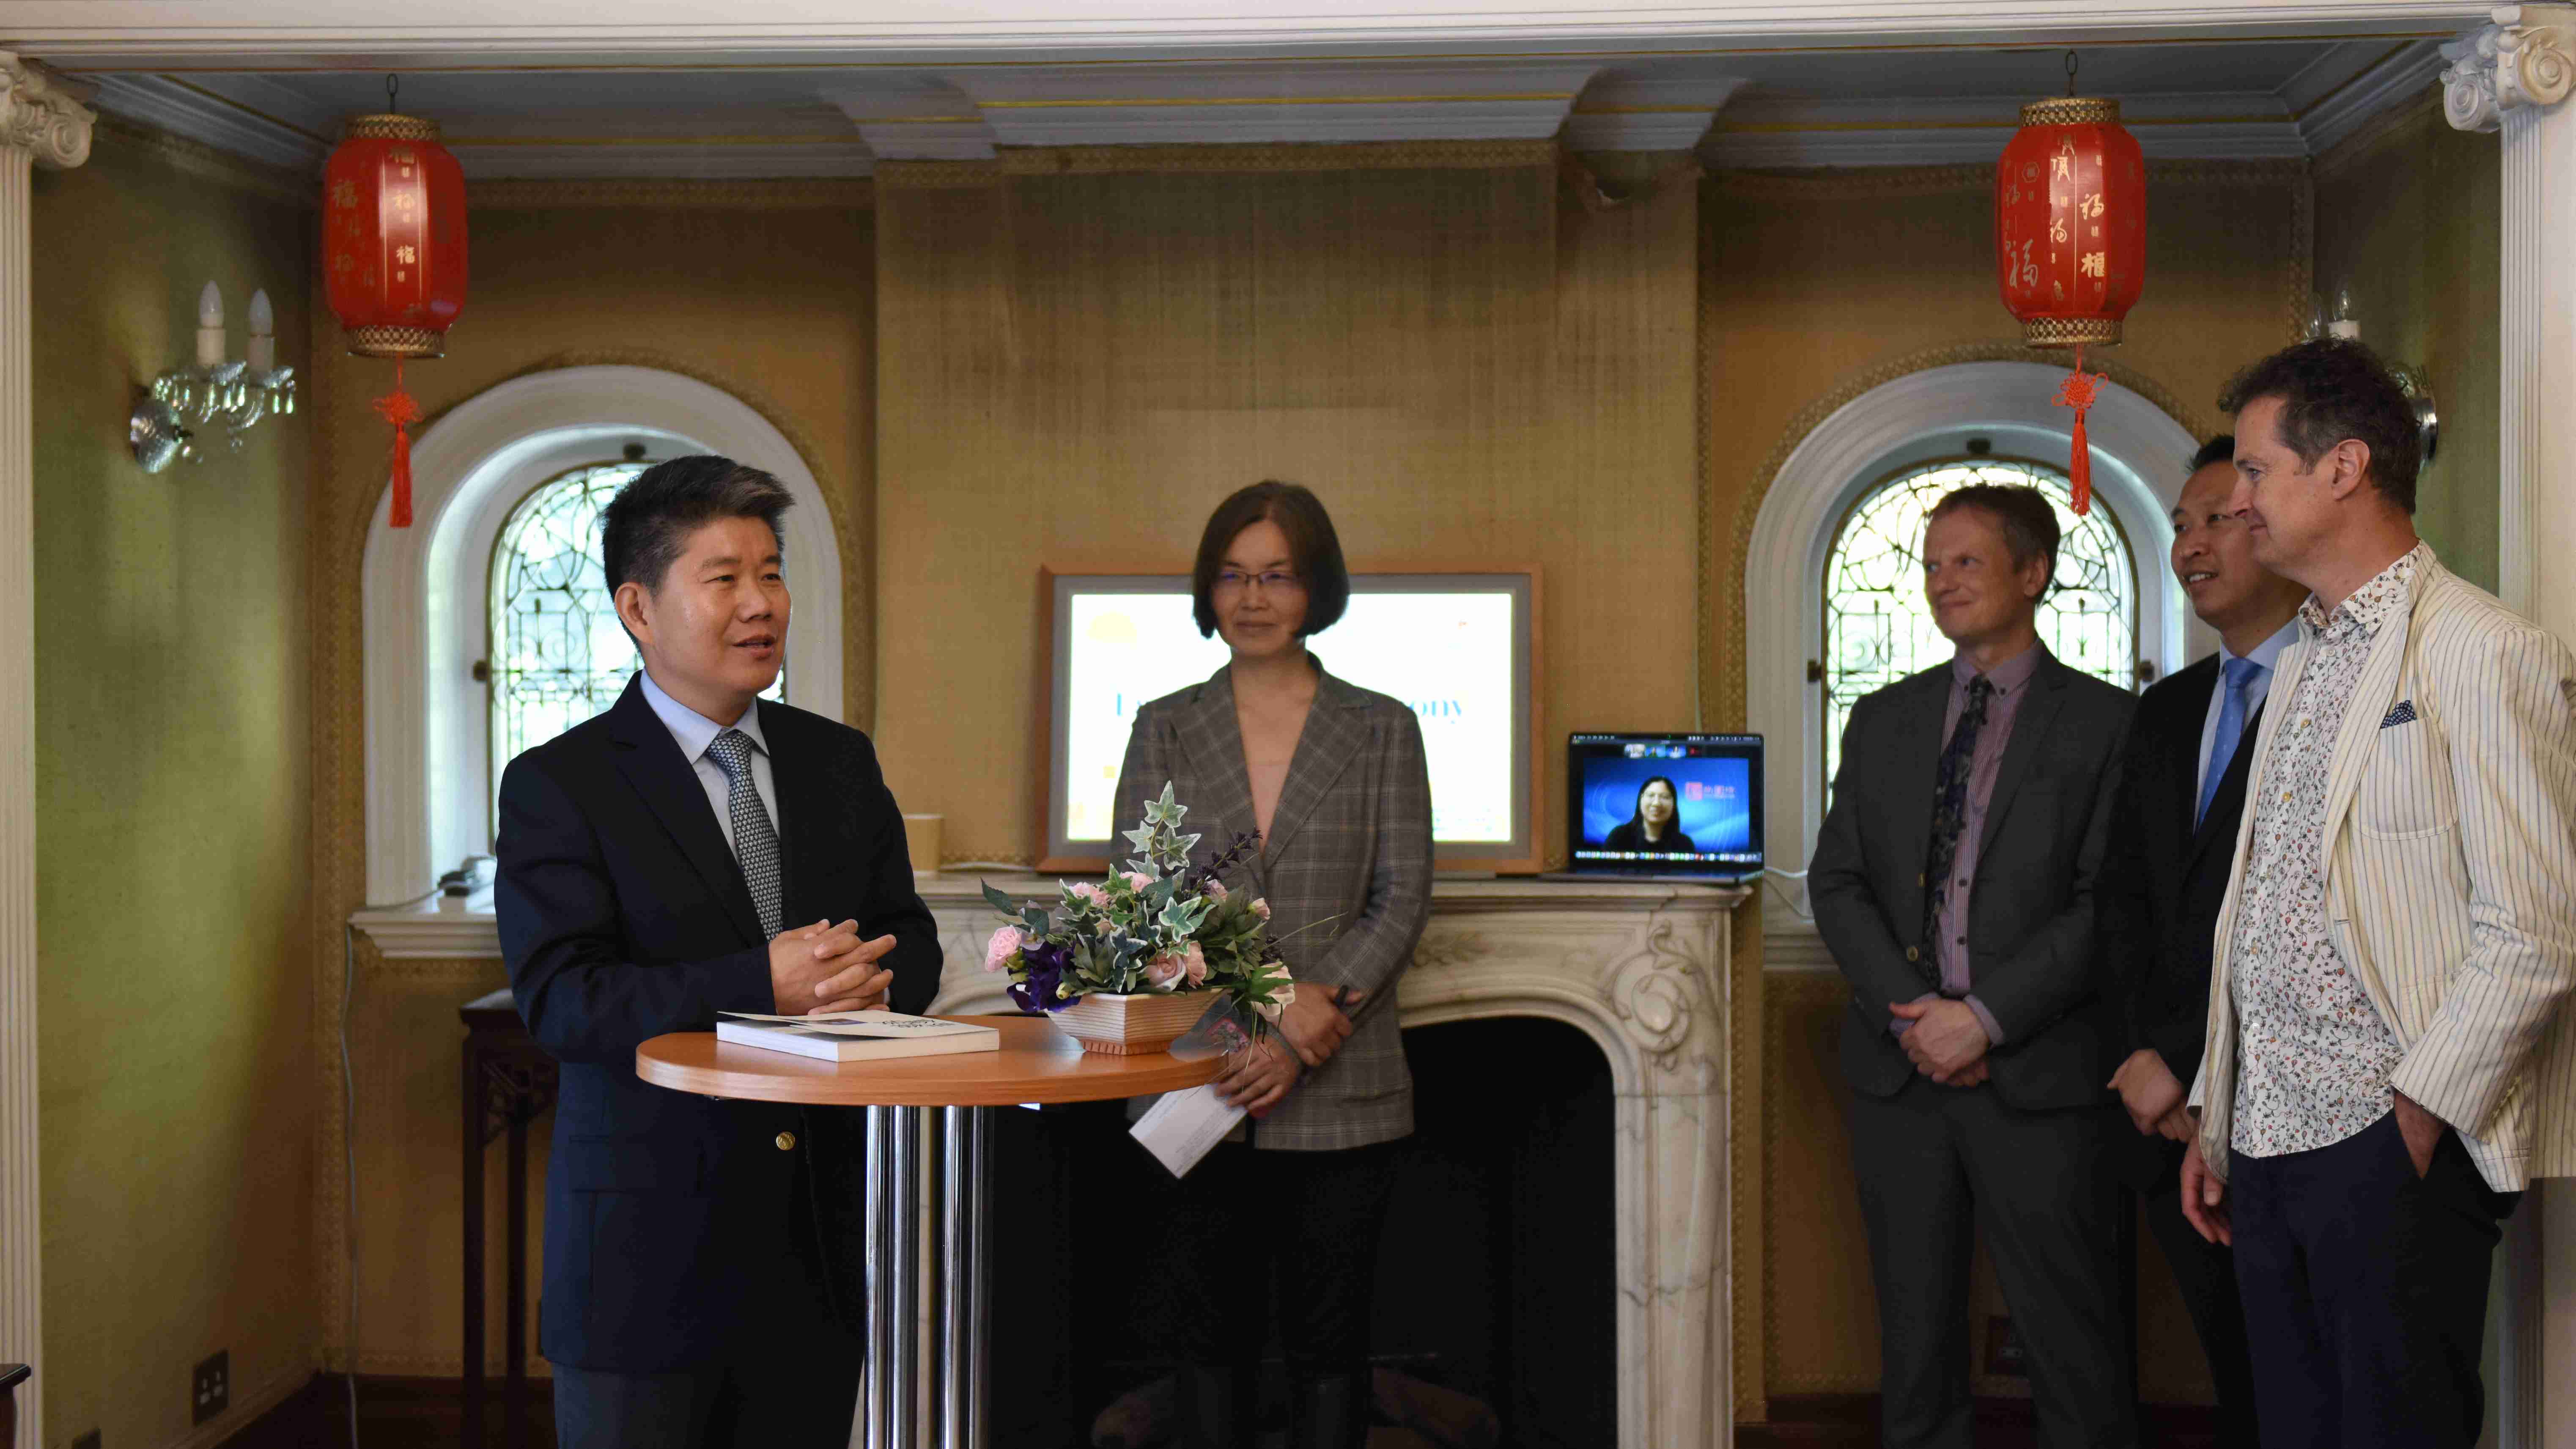 Launching ceremony of the 'Beauty Across Borders' China-UK photography competition held on July 26 in London. /CGTN